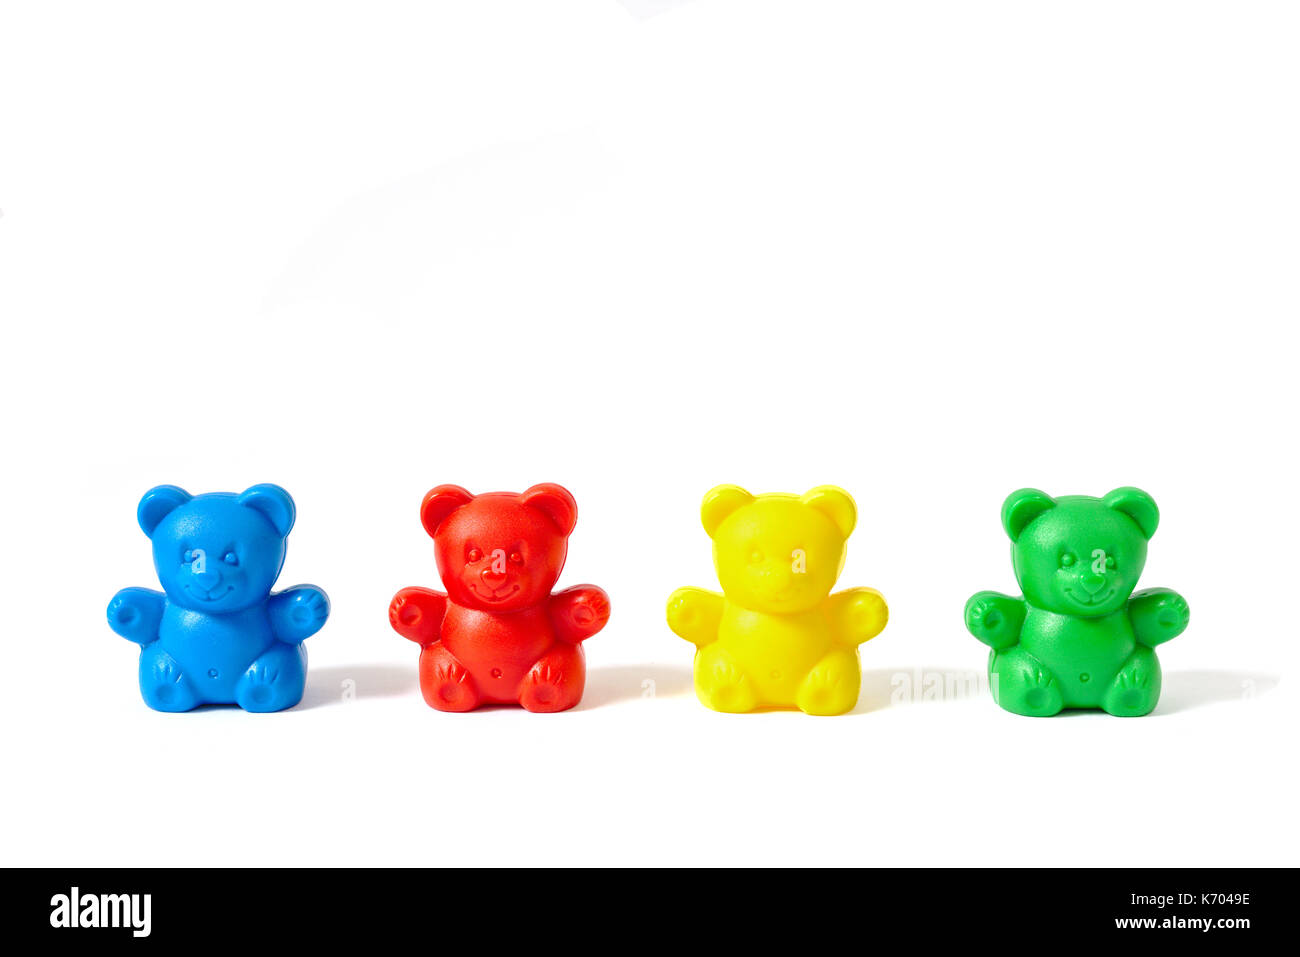 Small blue, red, yellow and green plastic toy bears isolated on white background Stock Photo